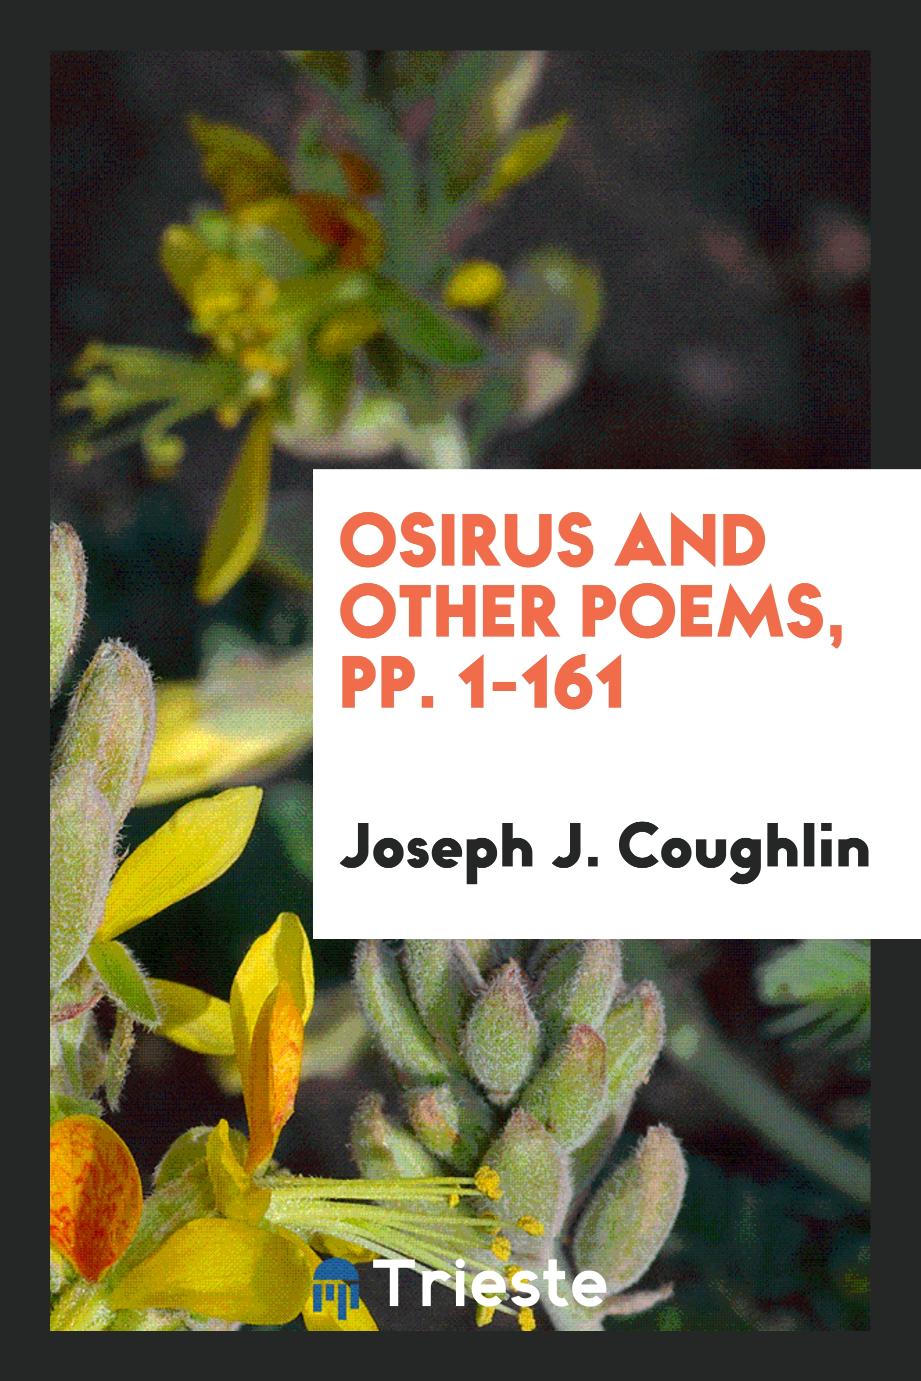 Osirus and Other Poems, pp. 1-161